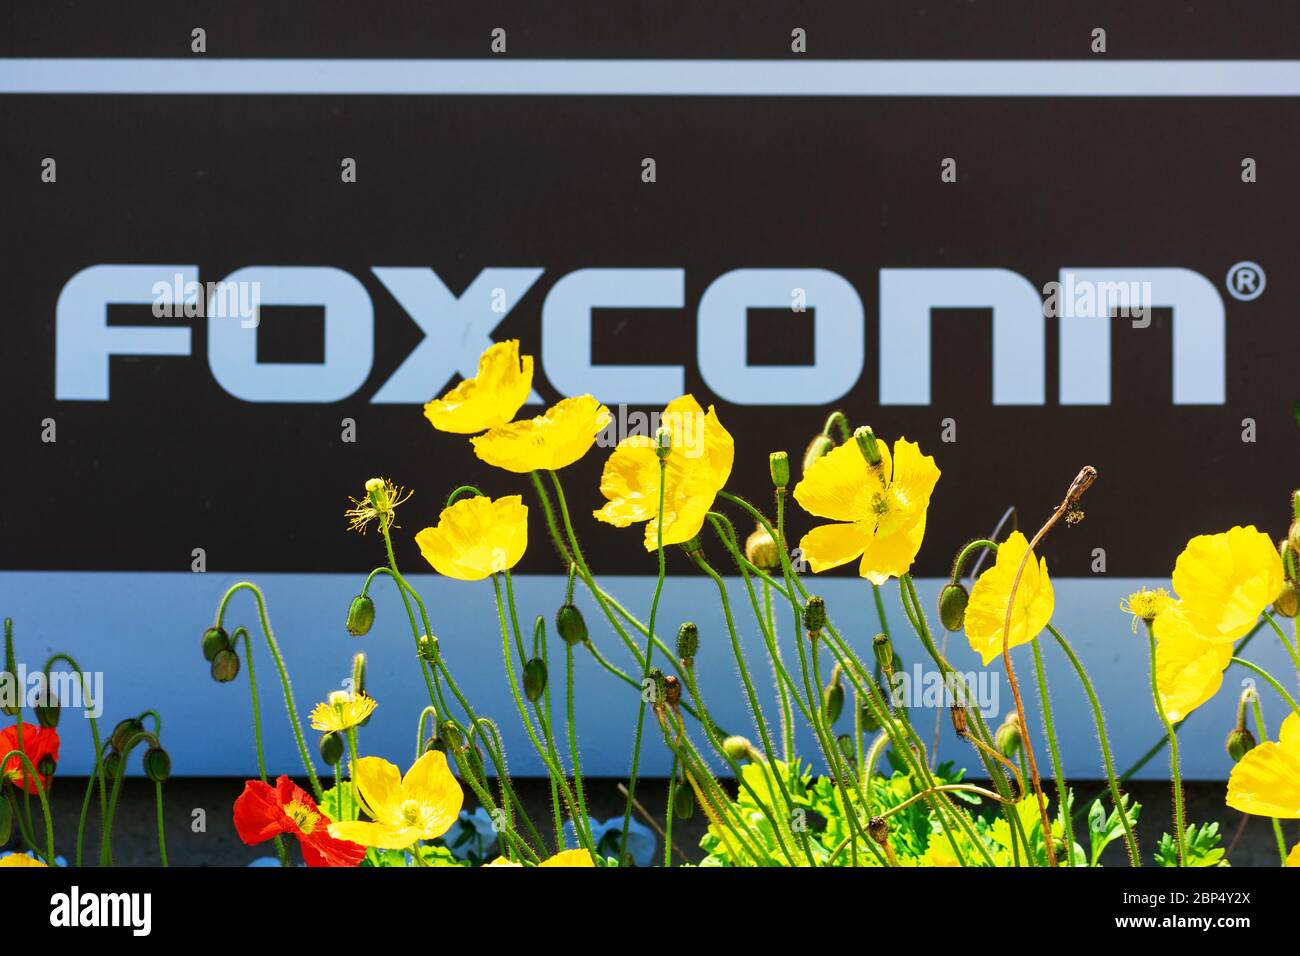 Blurred Foxconn sign in a blooming landscape. Hon Hai Precision Industry Co., Ltd., trading as Foxconn Technology Group, is a Taiwanese electronics co Stock Photo